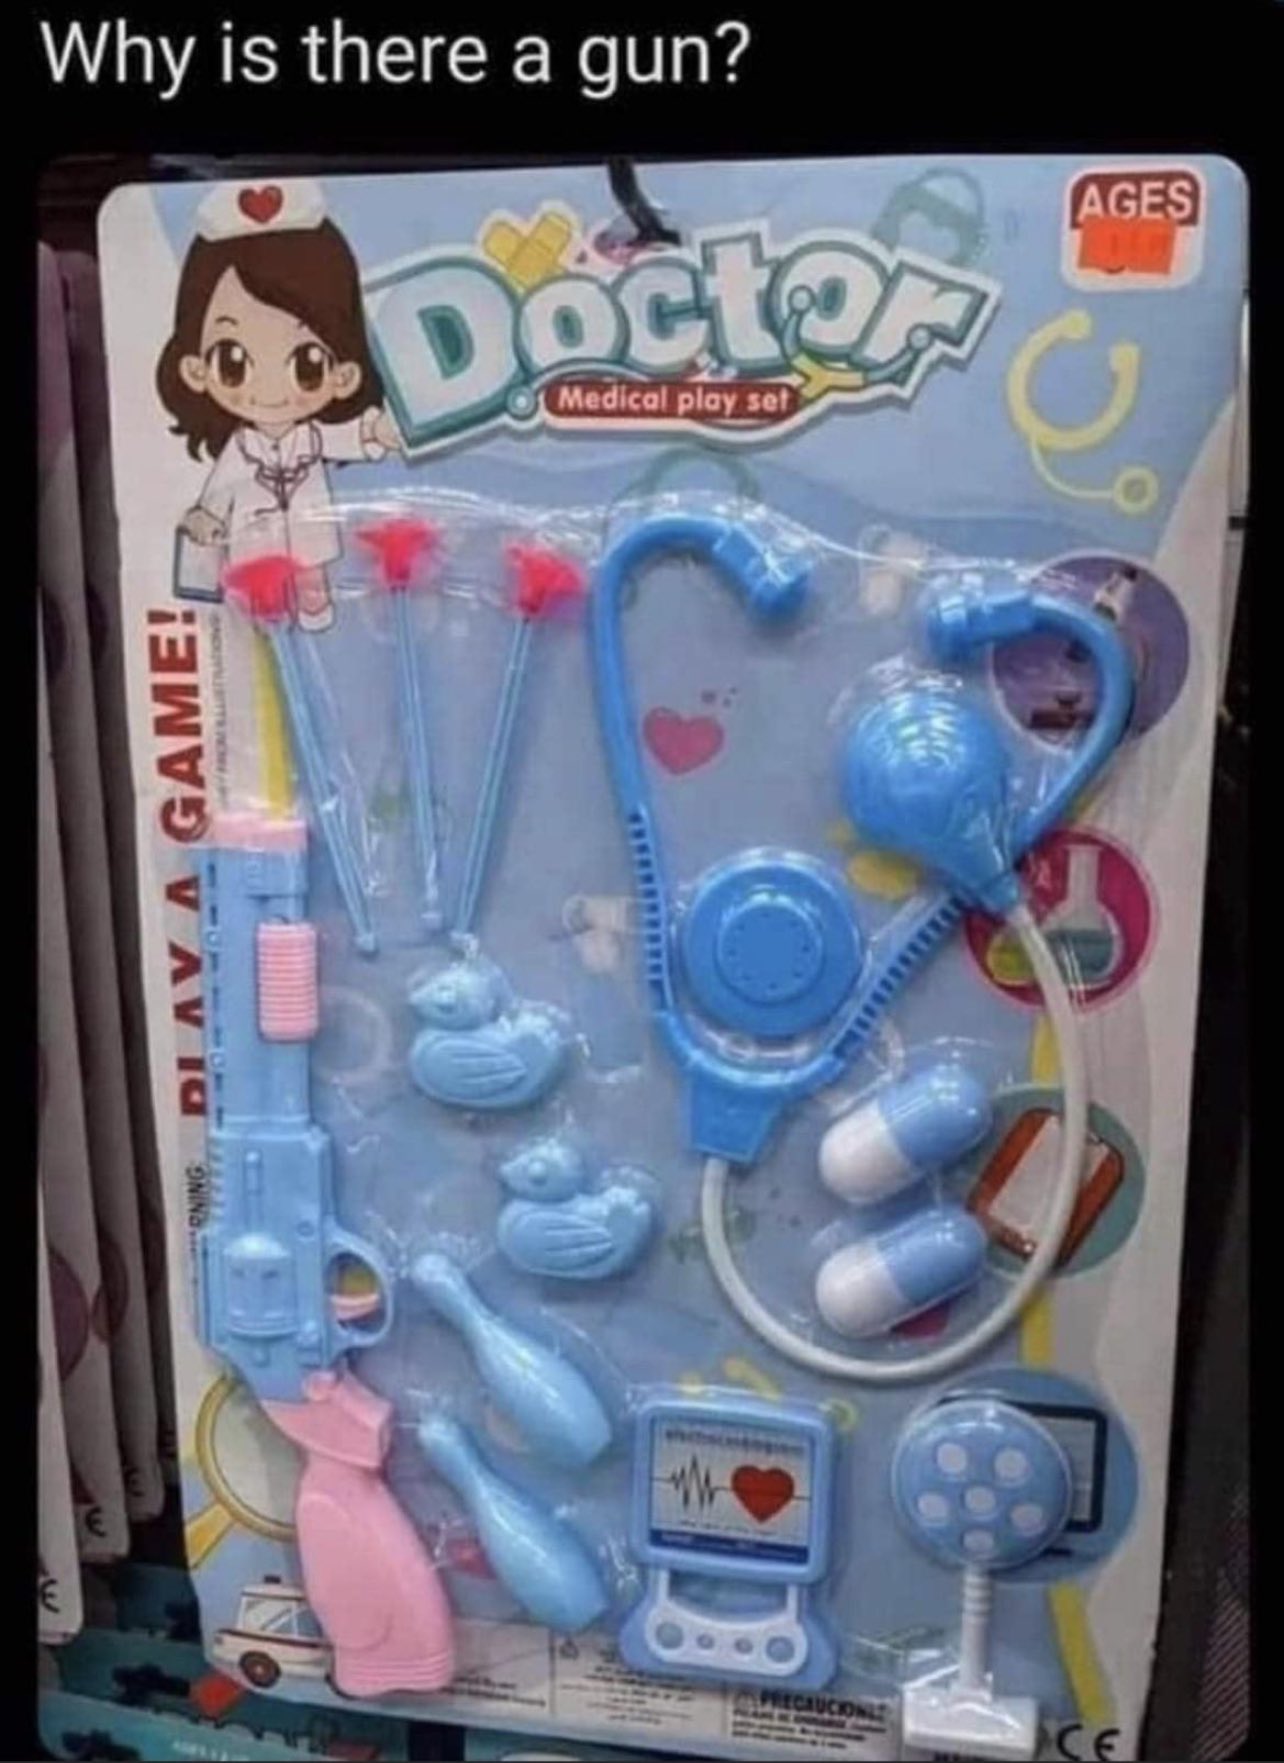 internet hall of  fame - obvious plant doctor - Why is there a gun? 3 Dlay A Game! Rning Doctor Medical play set 82 Min Precaucione Ages 15